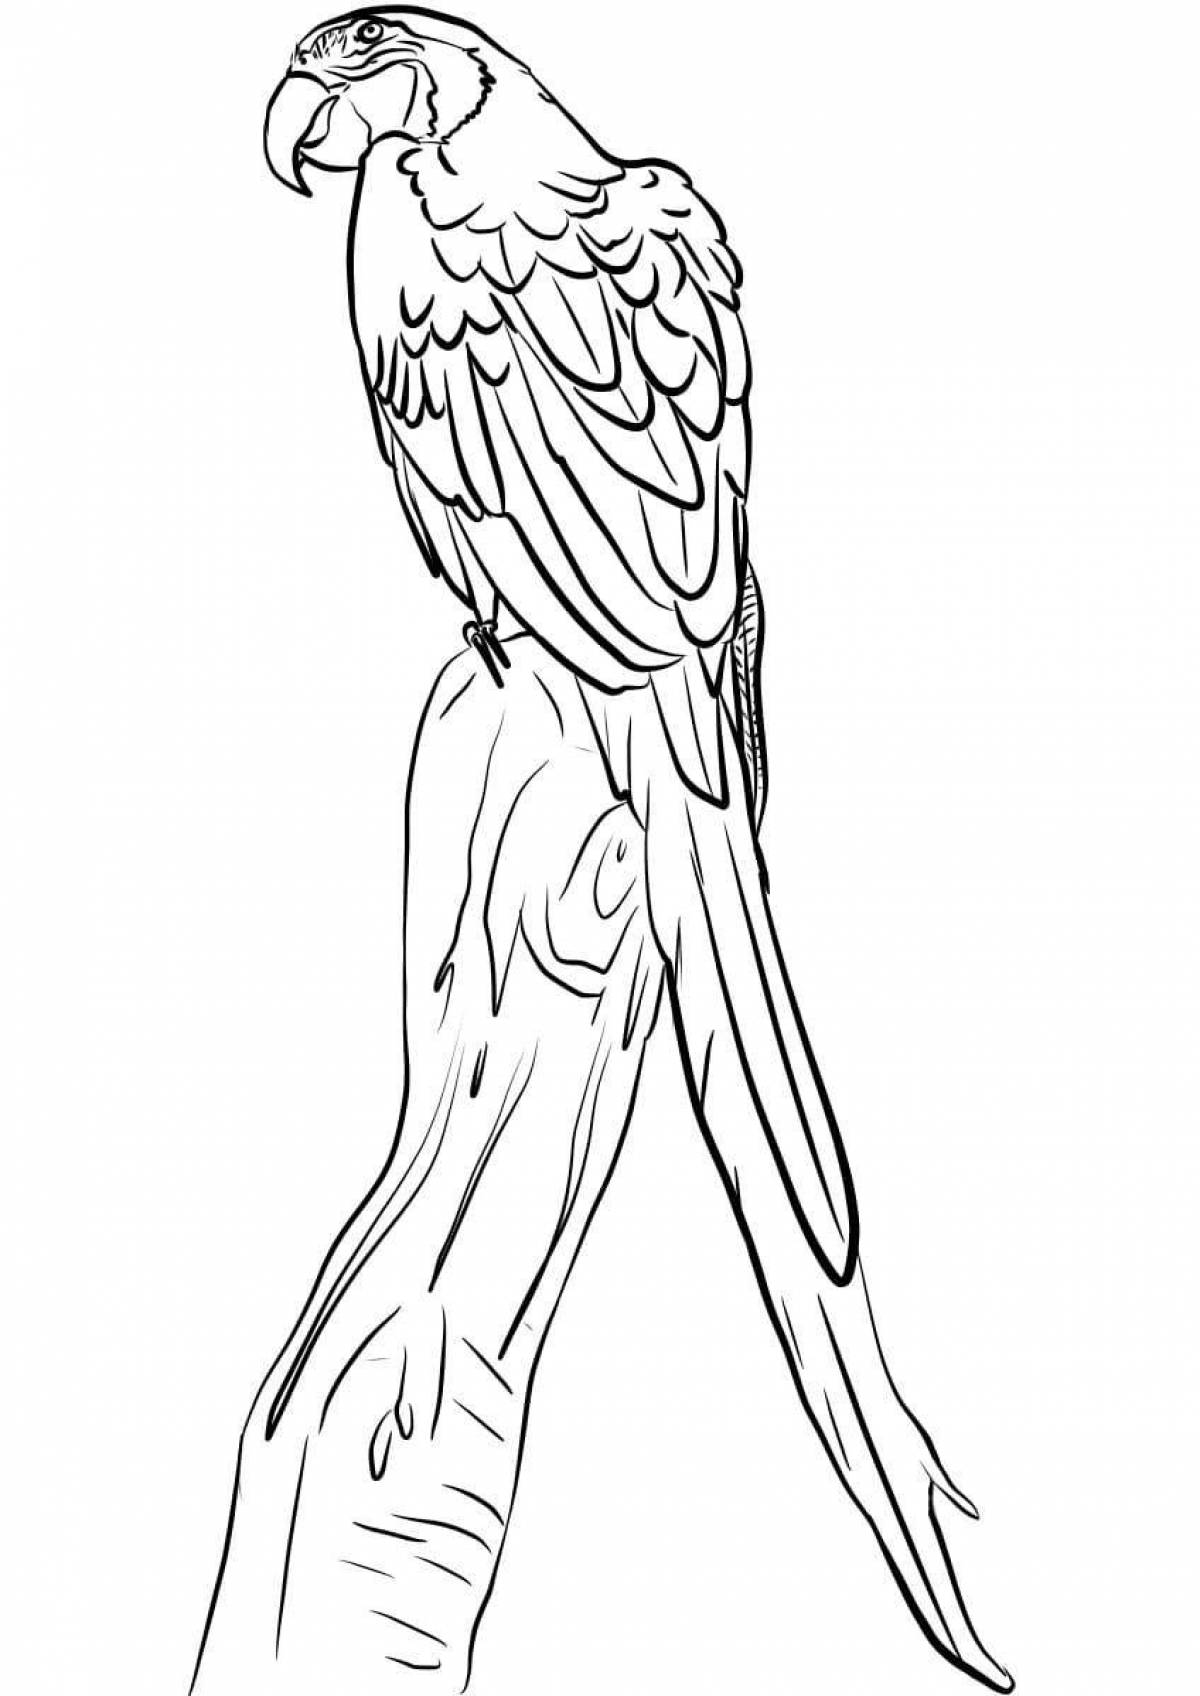 Coloring page happy macaw parrot